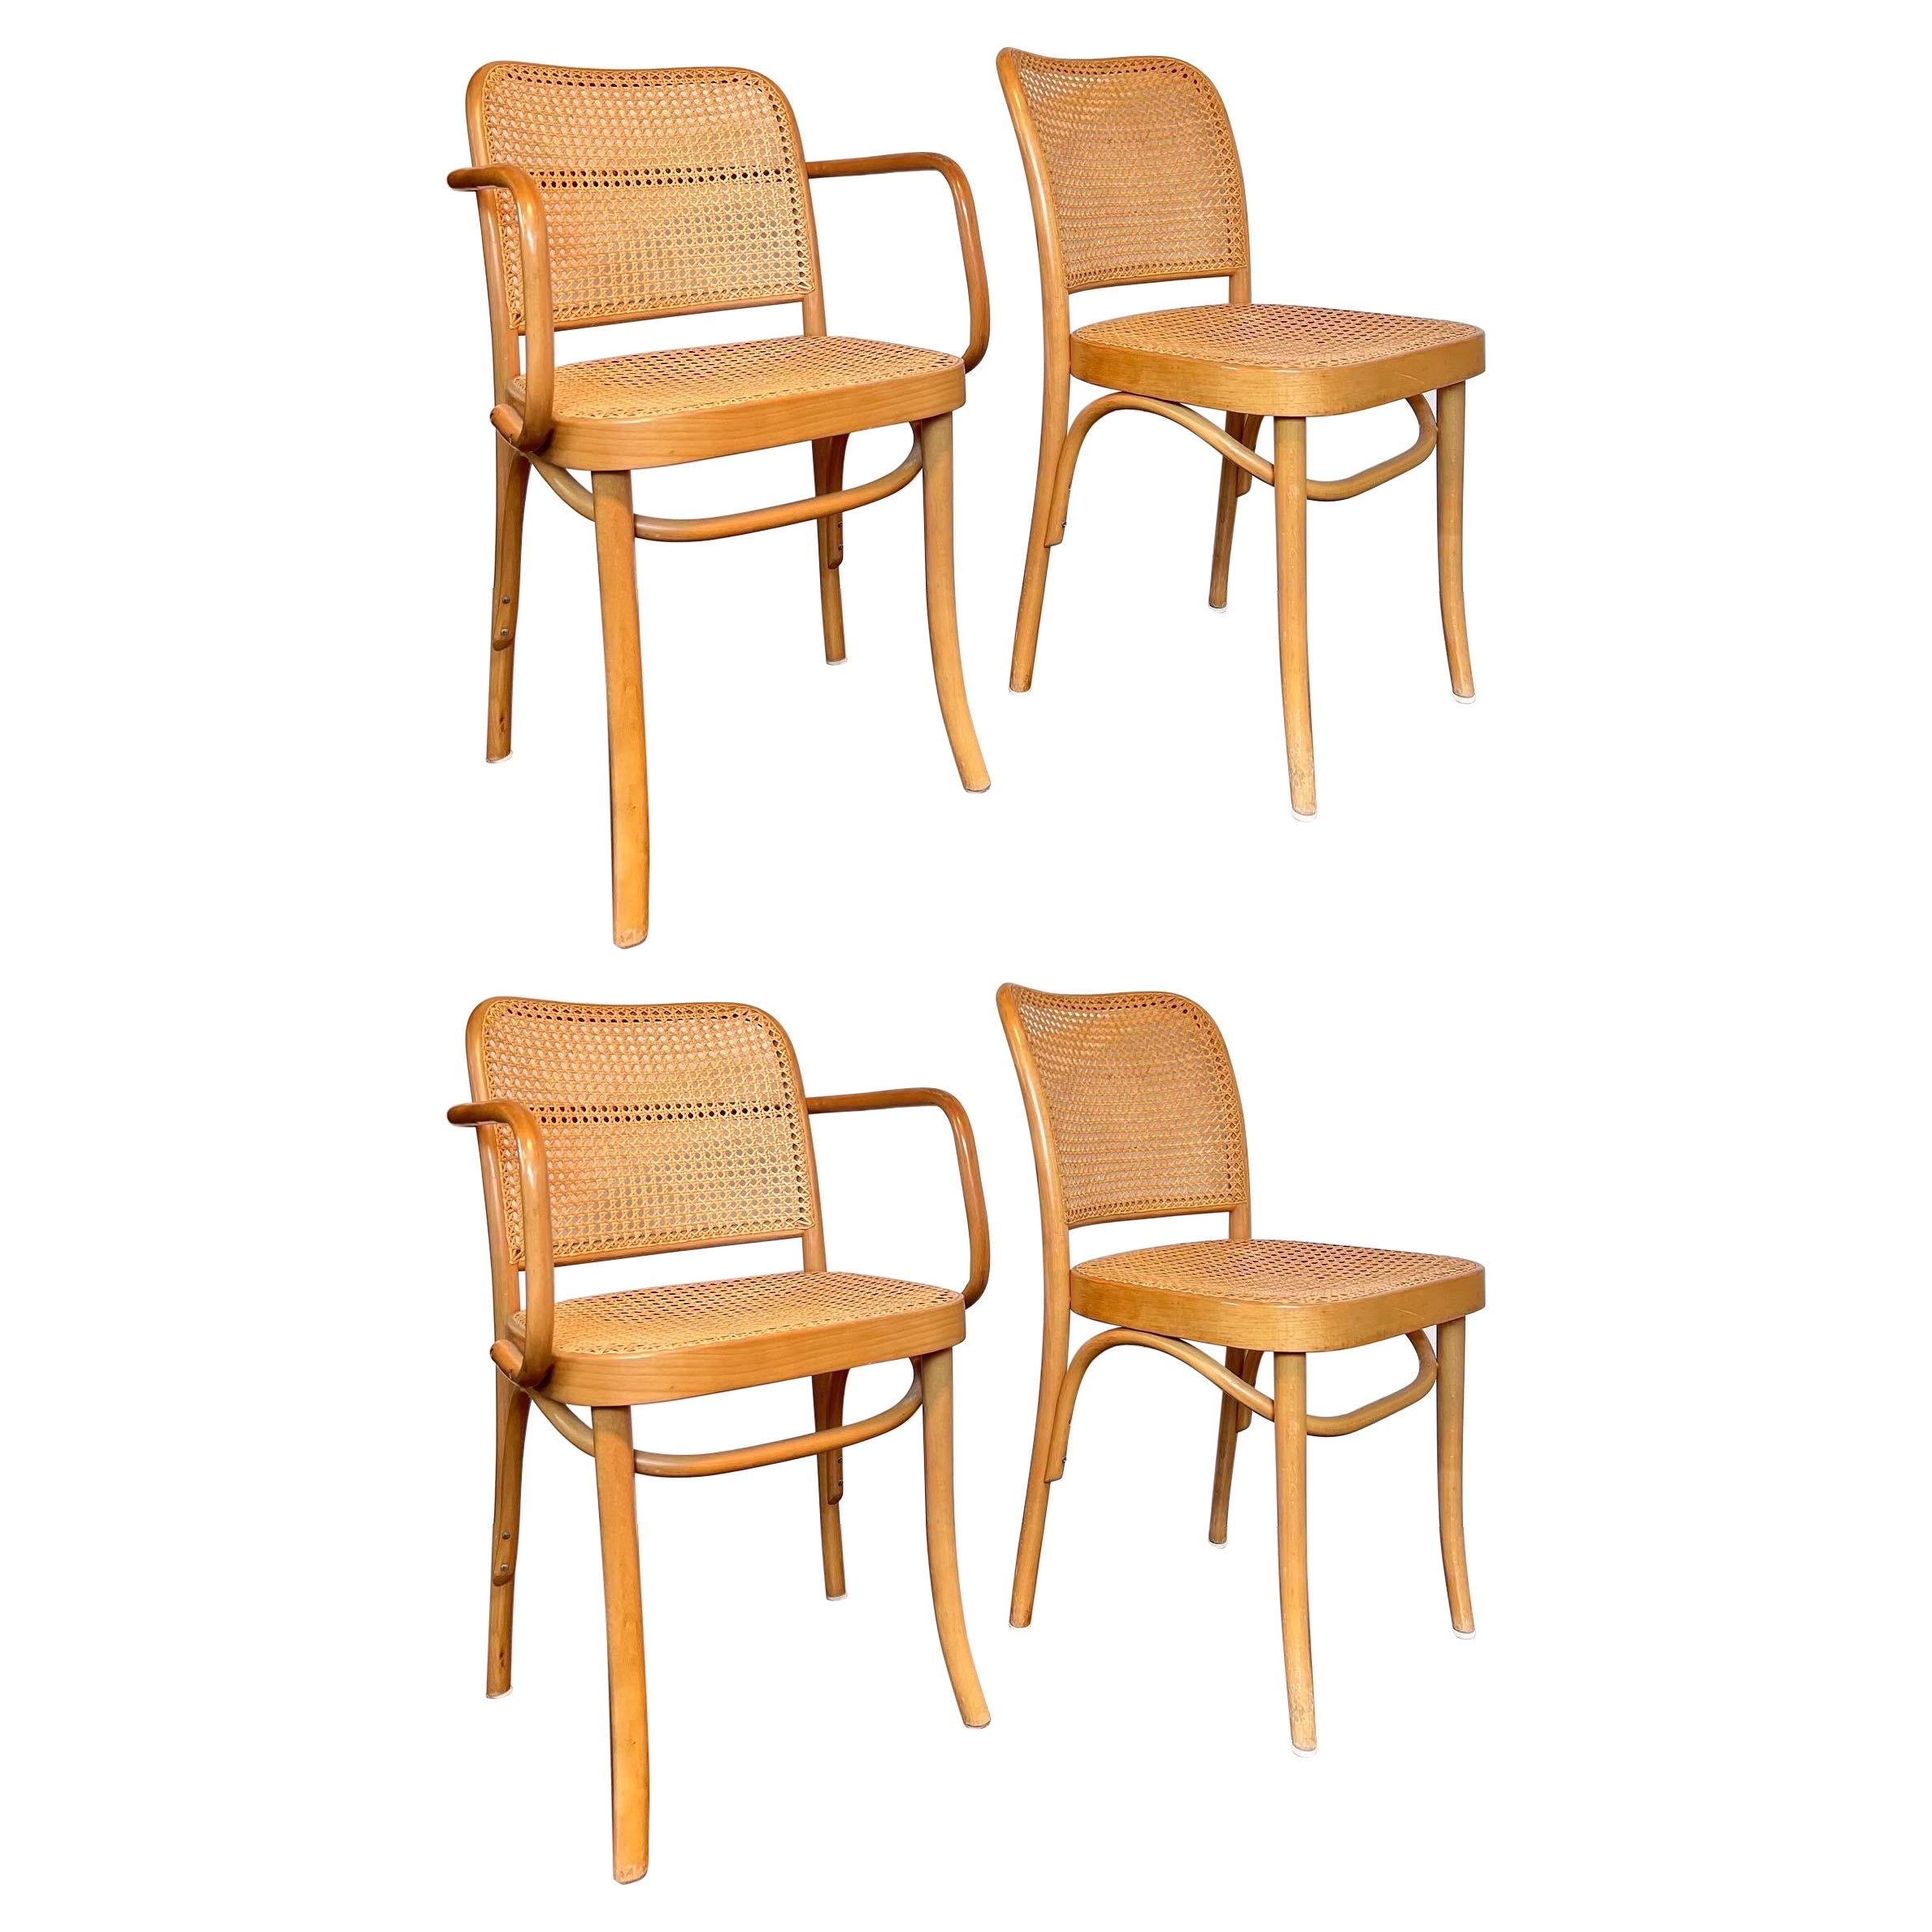 Set of 4 Josef Hoffmann Bentwood and Cane Chairs